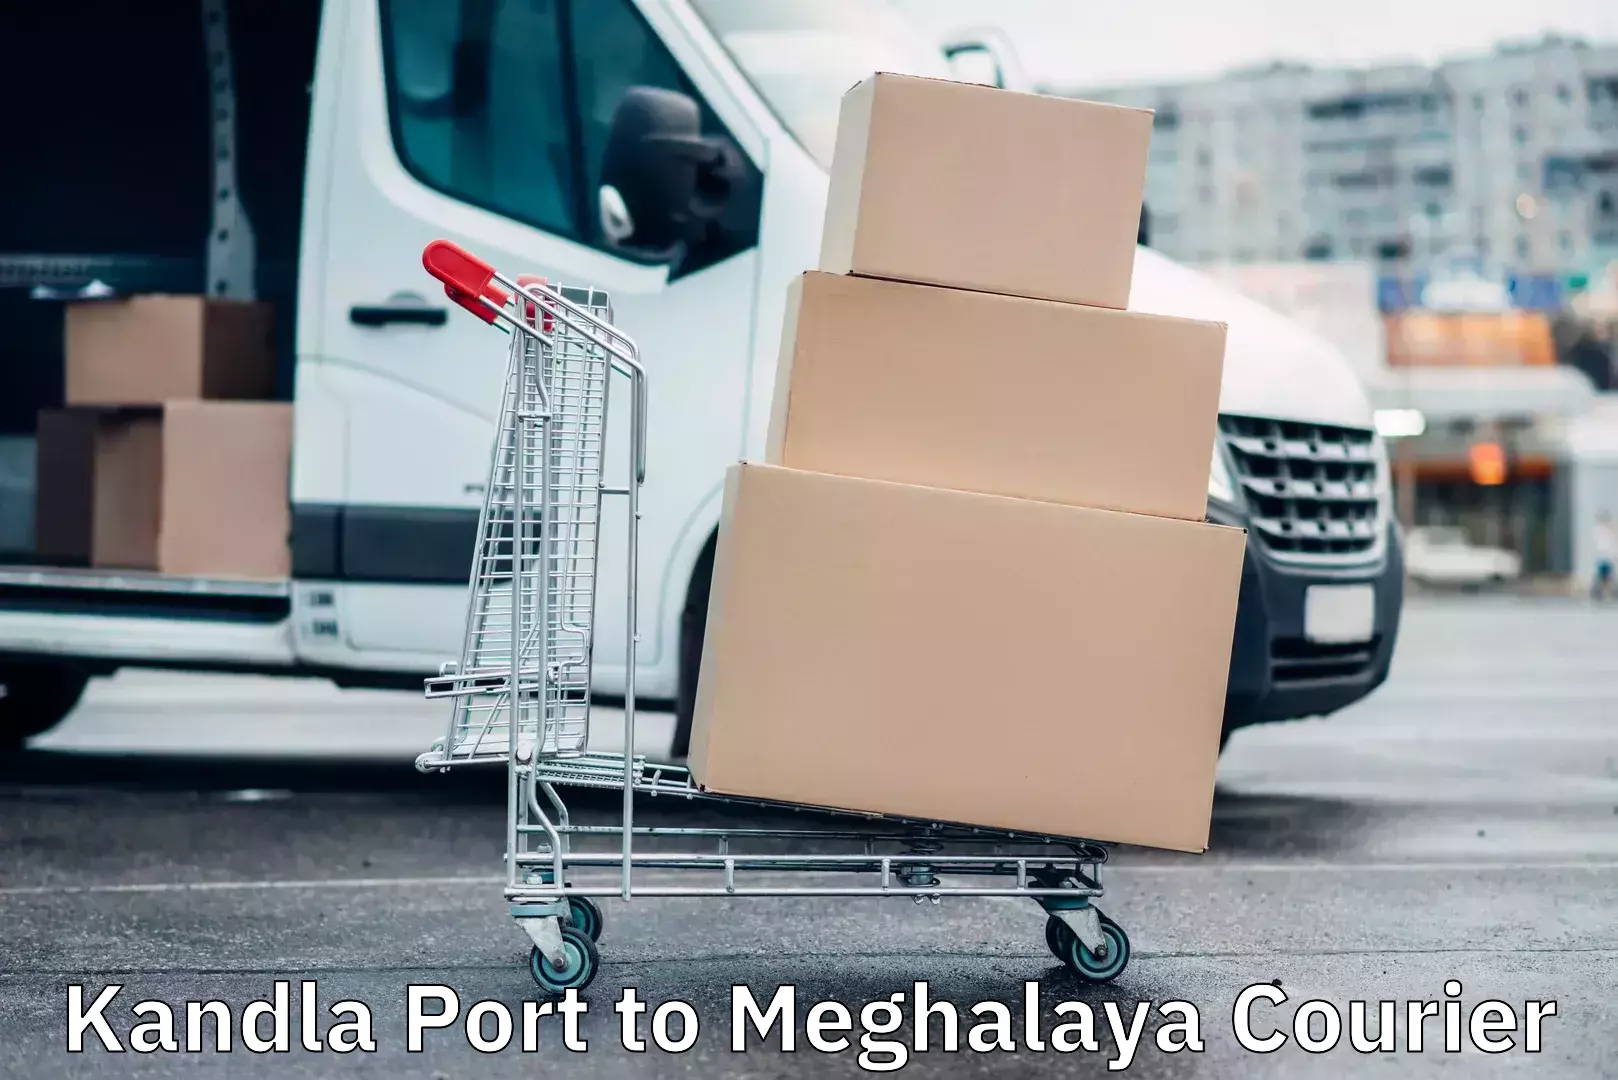 Easy access courier services in Kandla Port to Dkhiah West